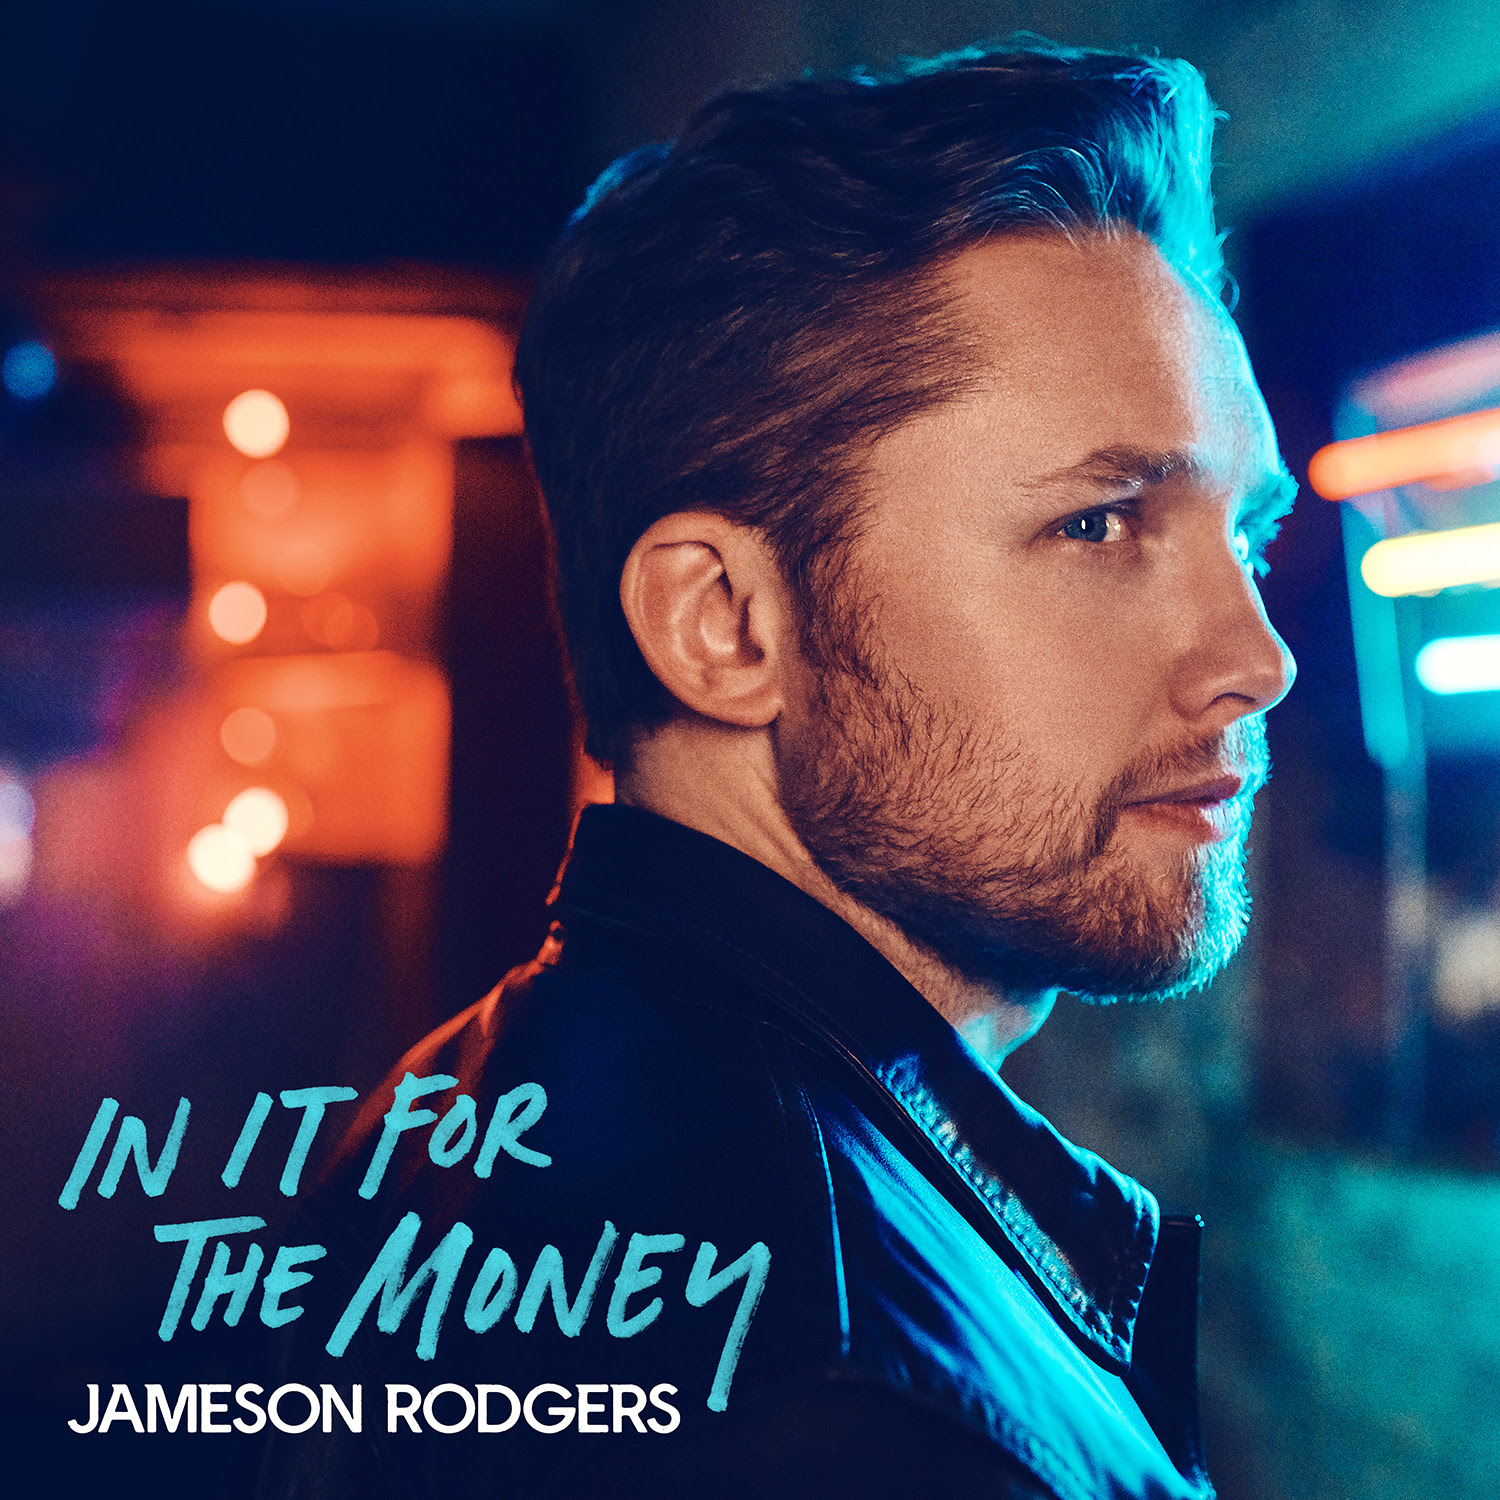 Jameson Rodgers' EP, 'In It For The Money' is out now, April 23rd